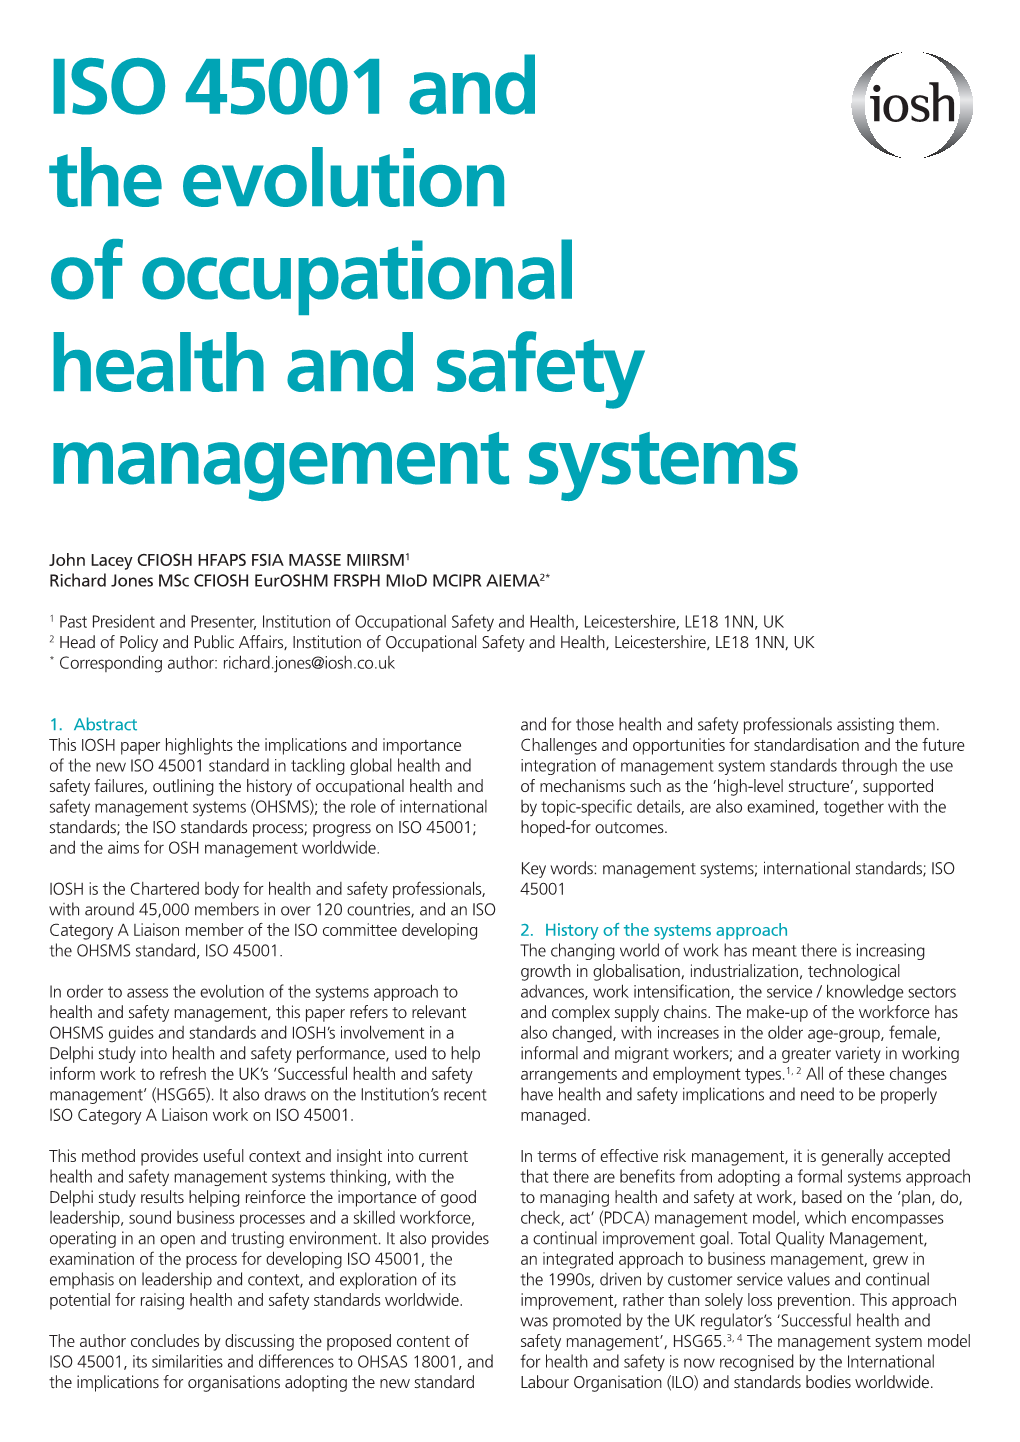 ISO 45001 and the Evolution of Occupational Health and Safety Management Systems